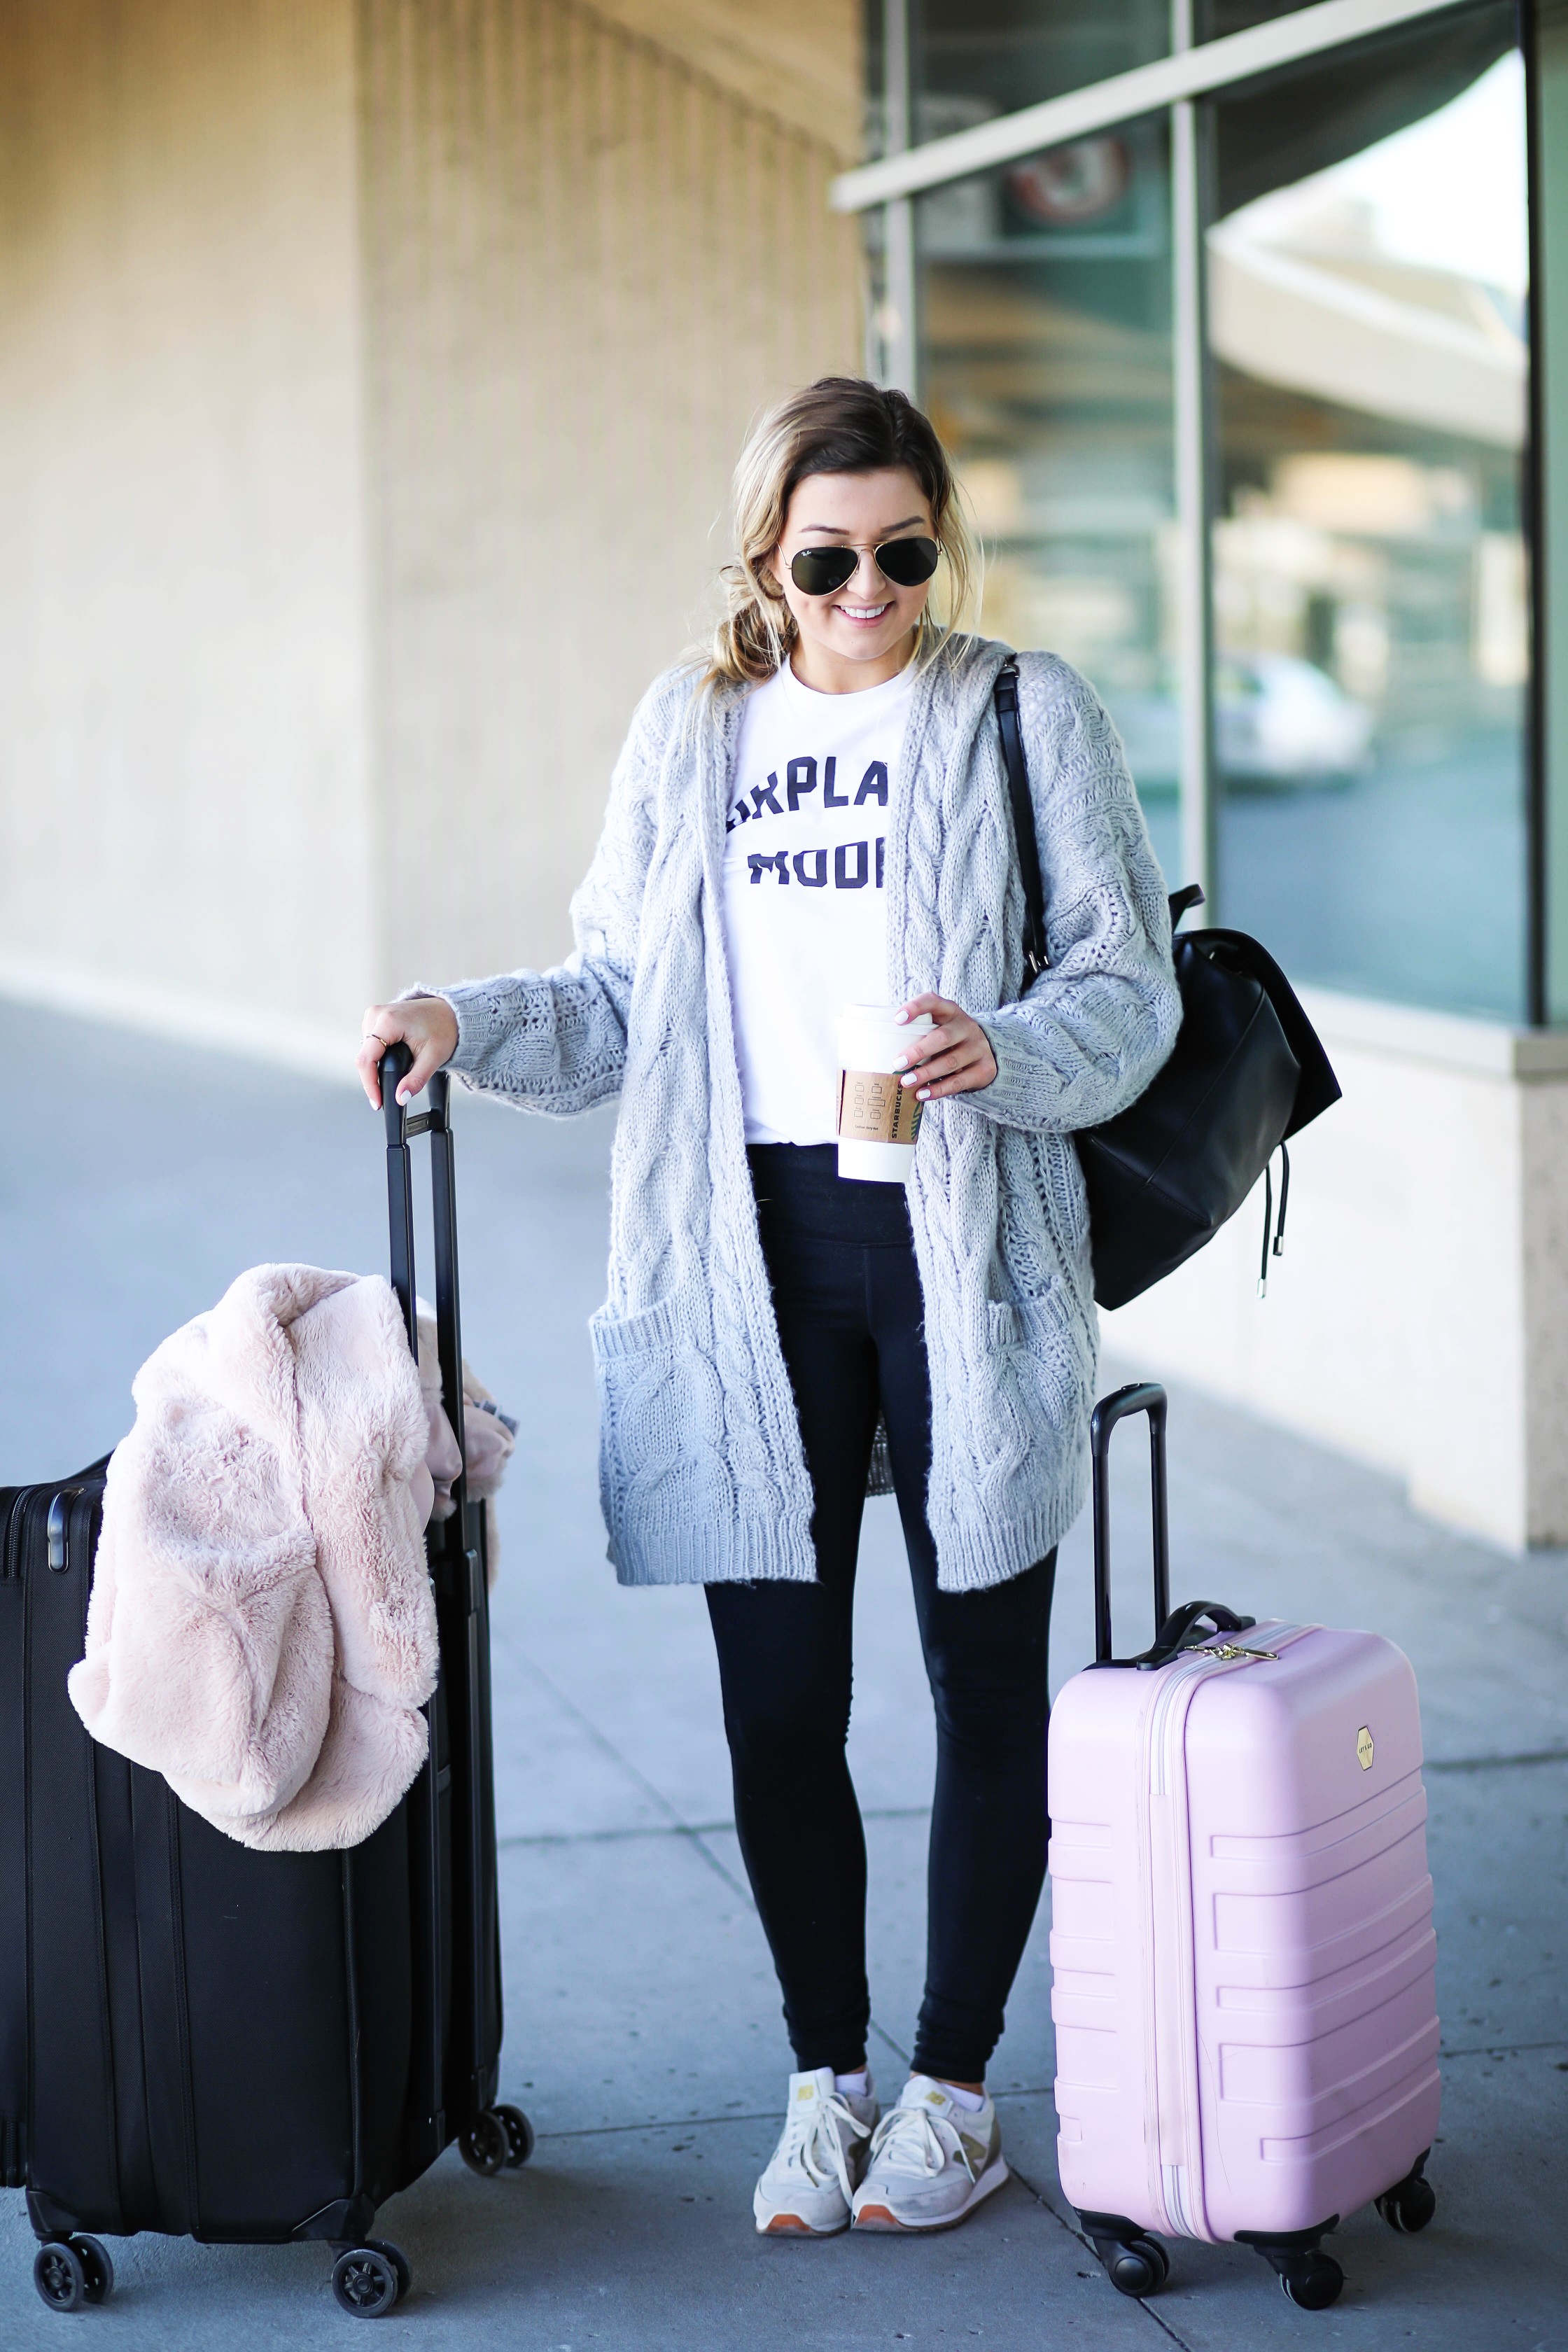 Travel Outfit Ideas: What To Wear On Your Flight